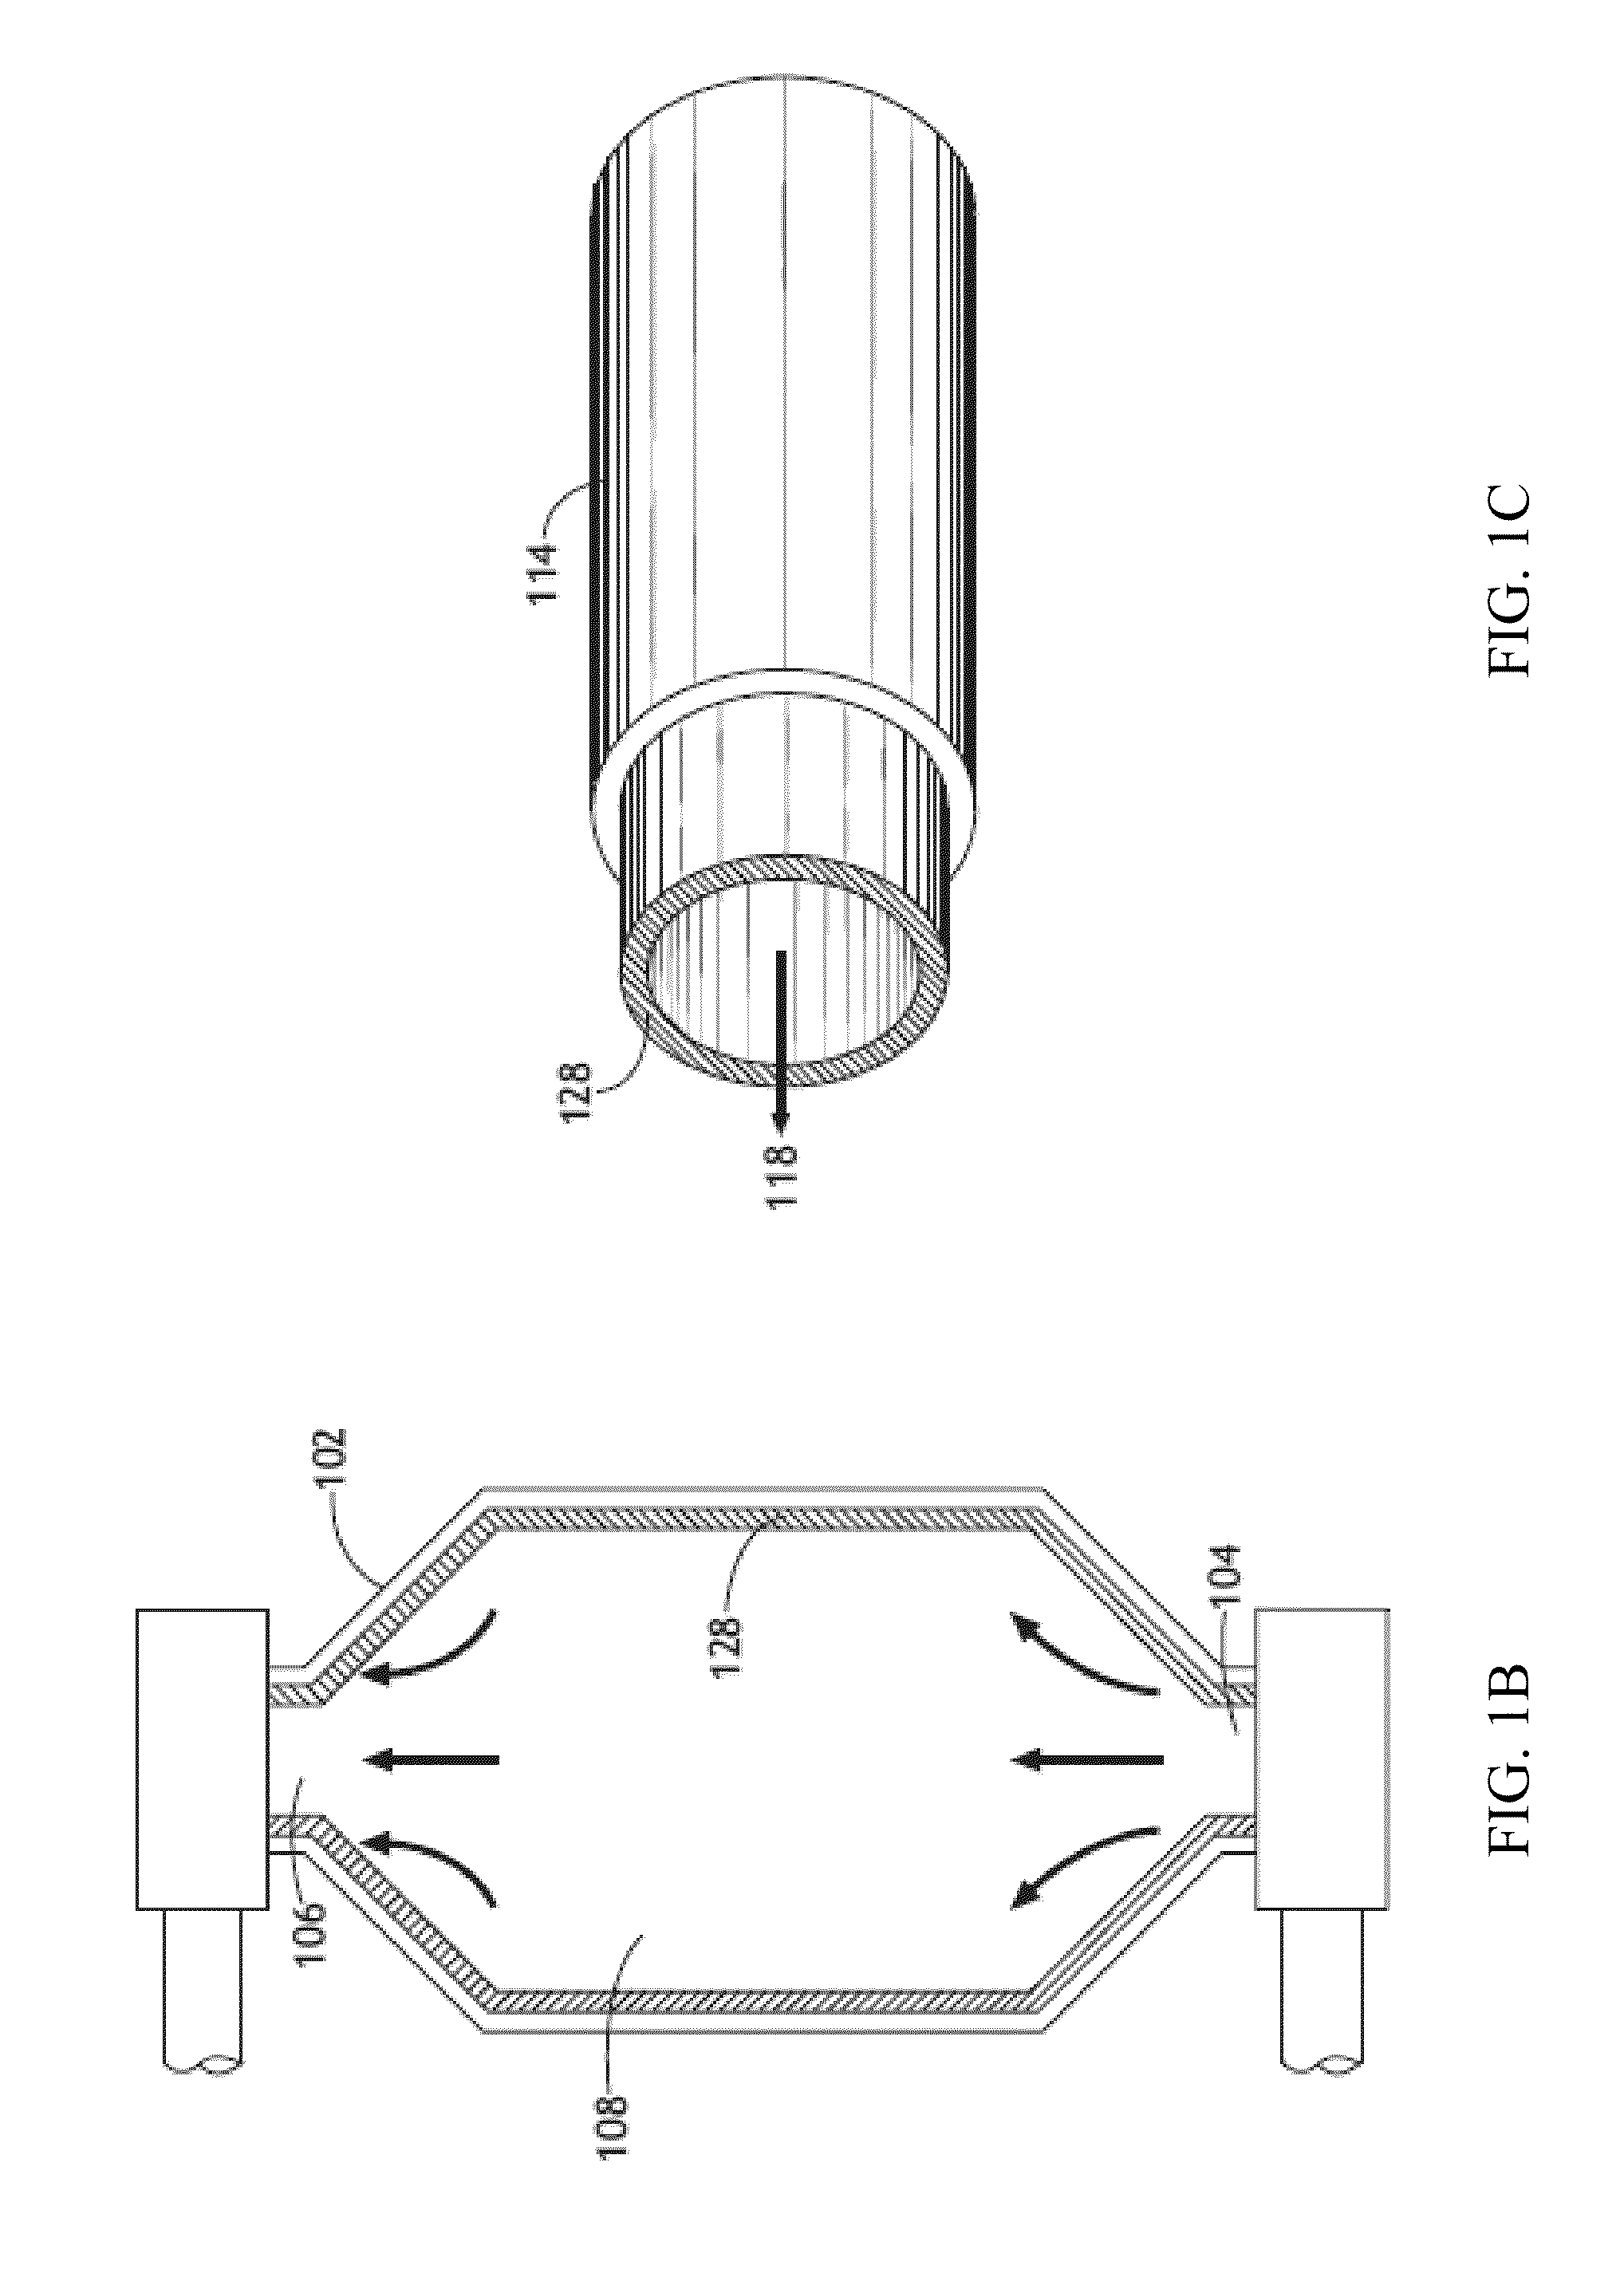 Molten nuclear fuel salts and related systems and methods